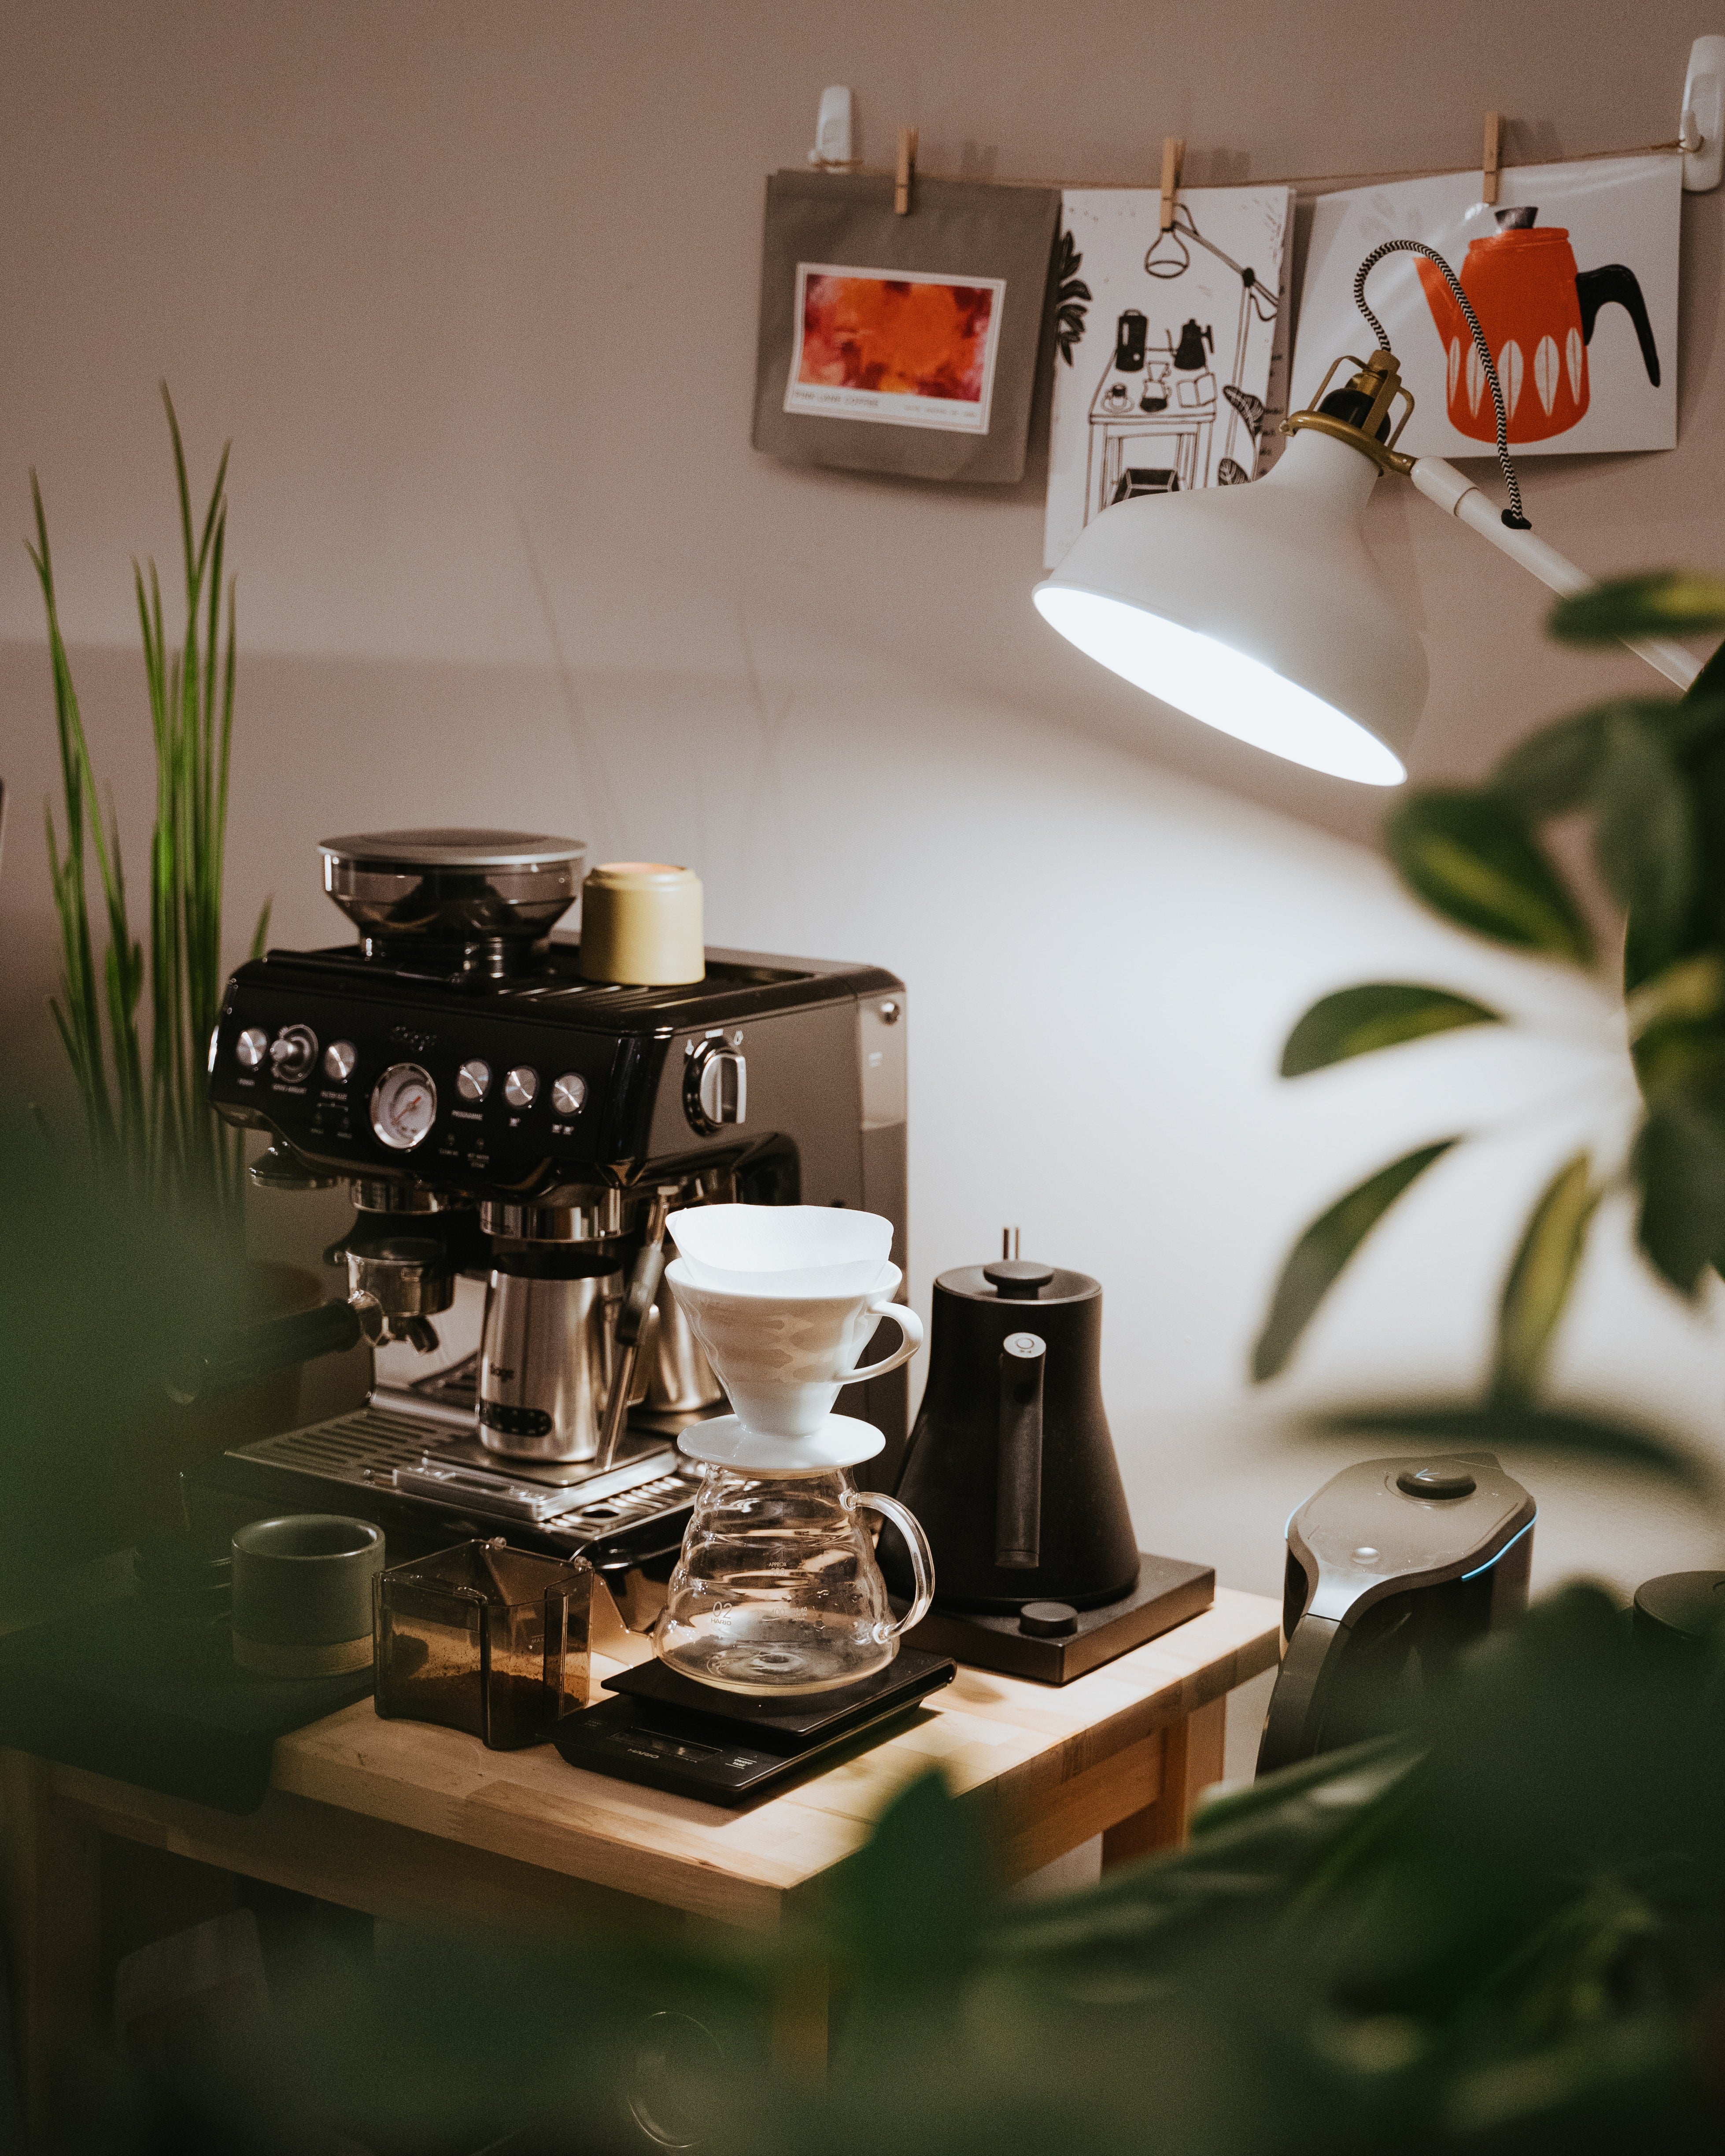 How to Choose the Perfect Prosumer Home Espresso Machine